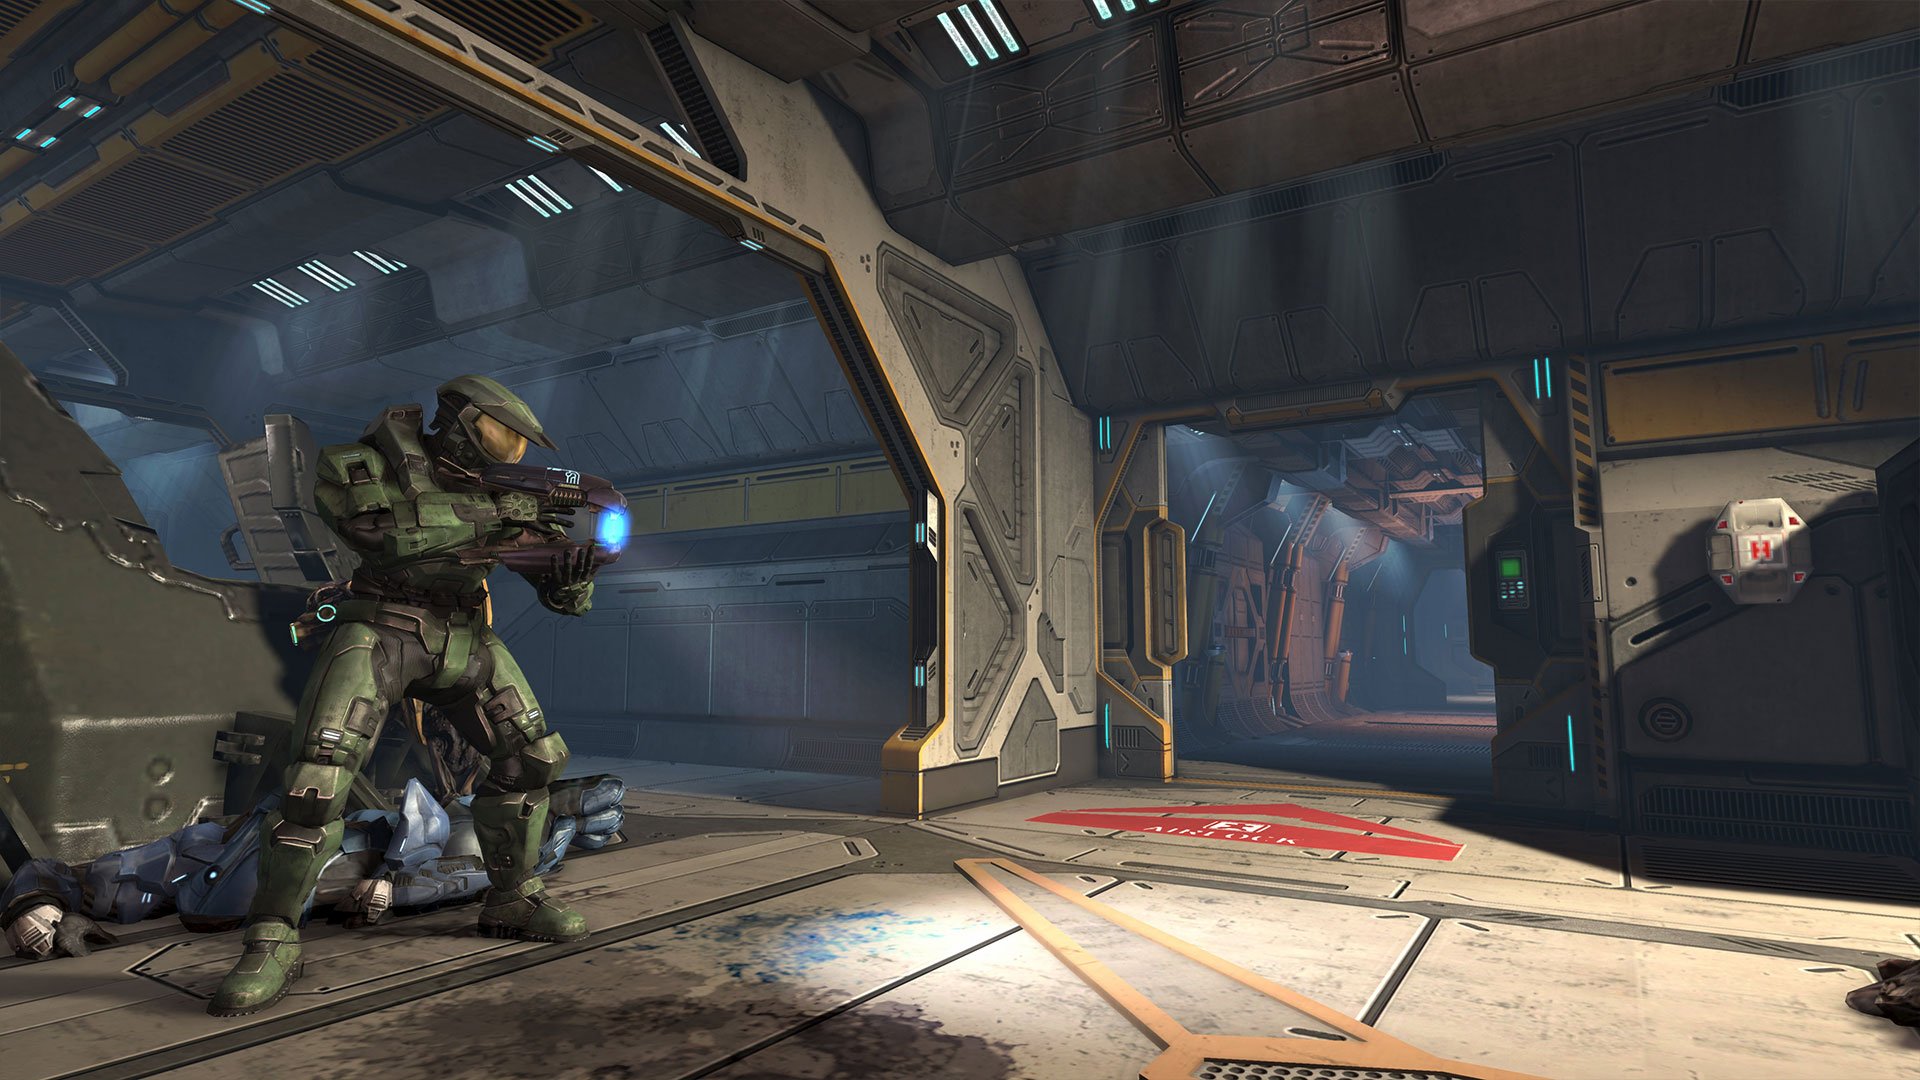 Halo: Combat Evolved PC version begins public tests in January